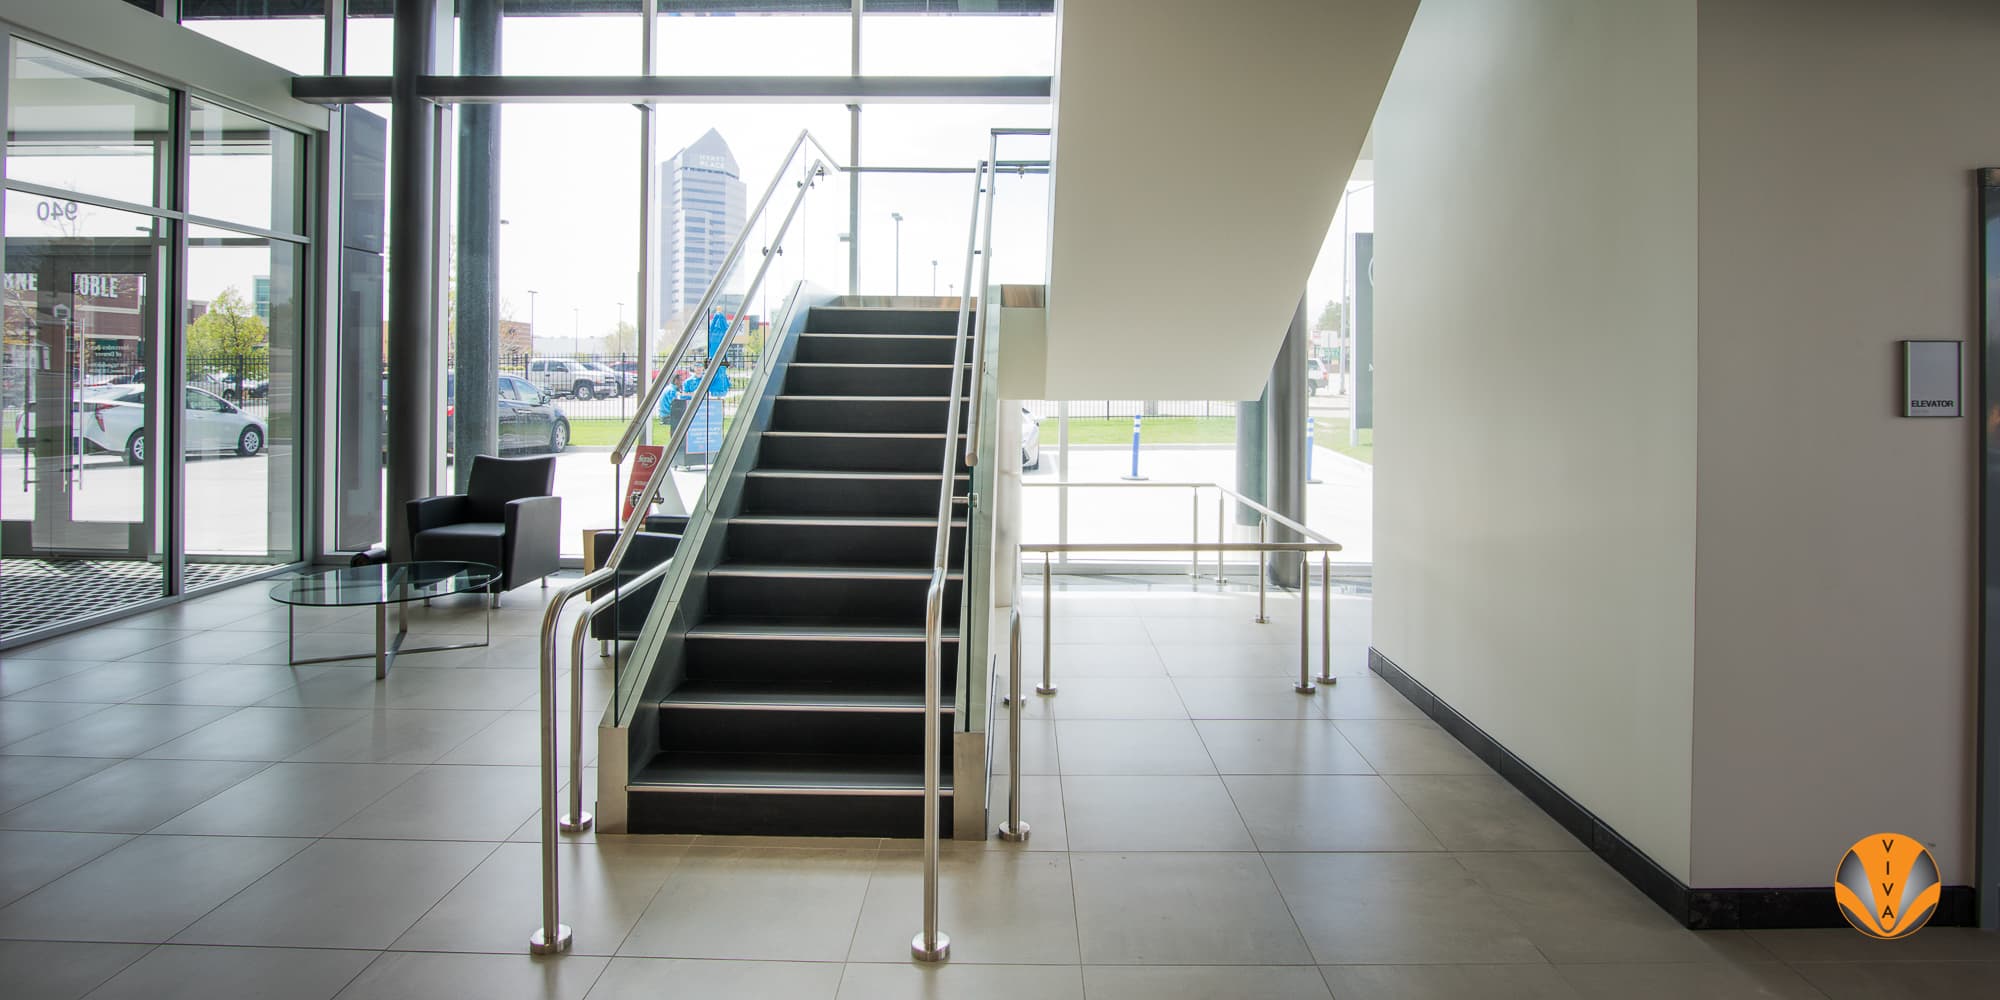 SHOE Structural Glass Railing System